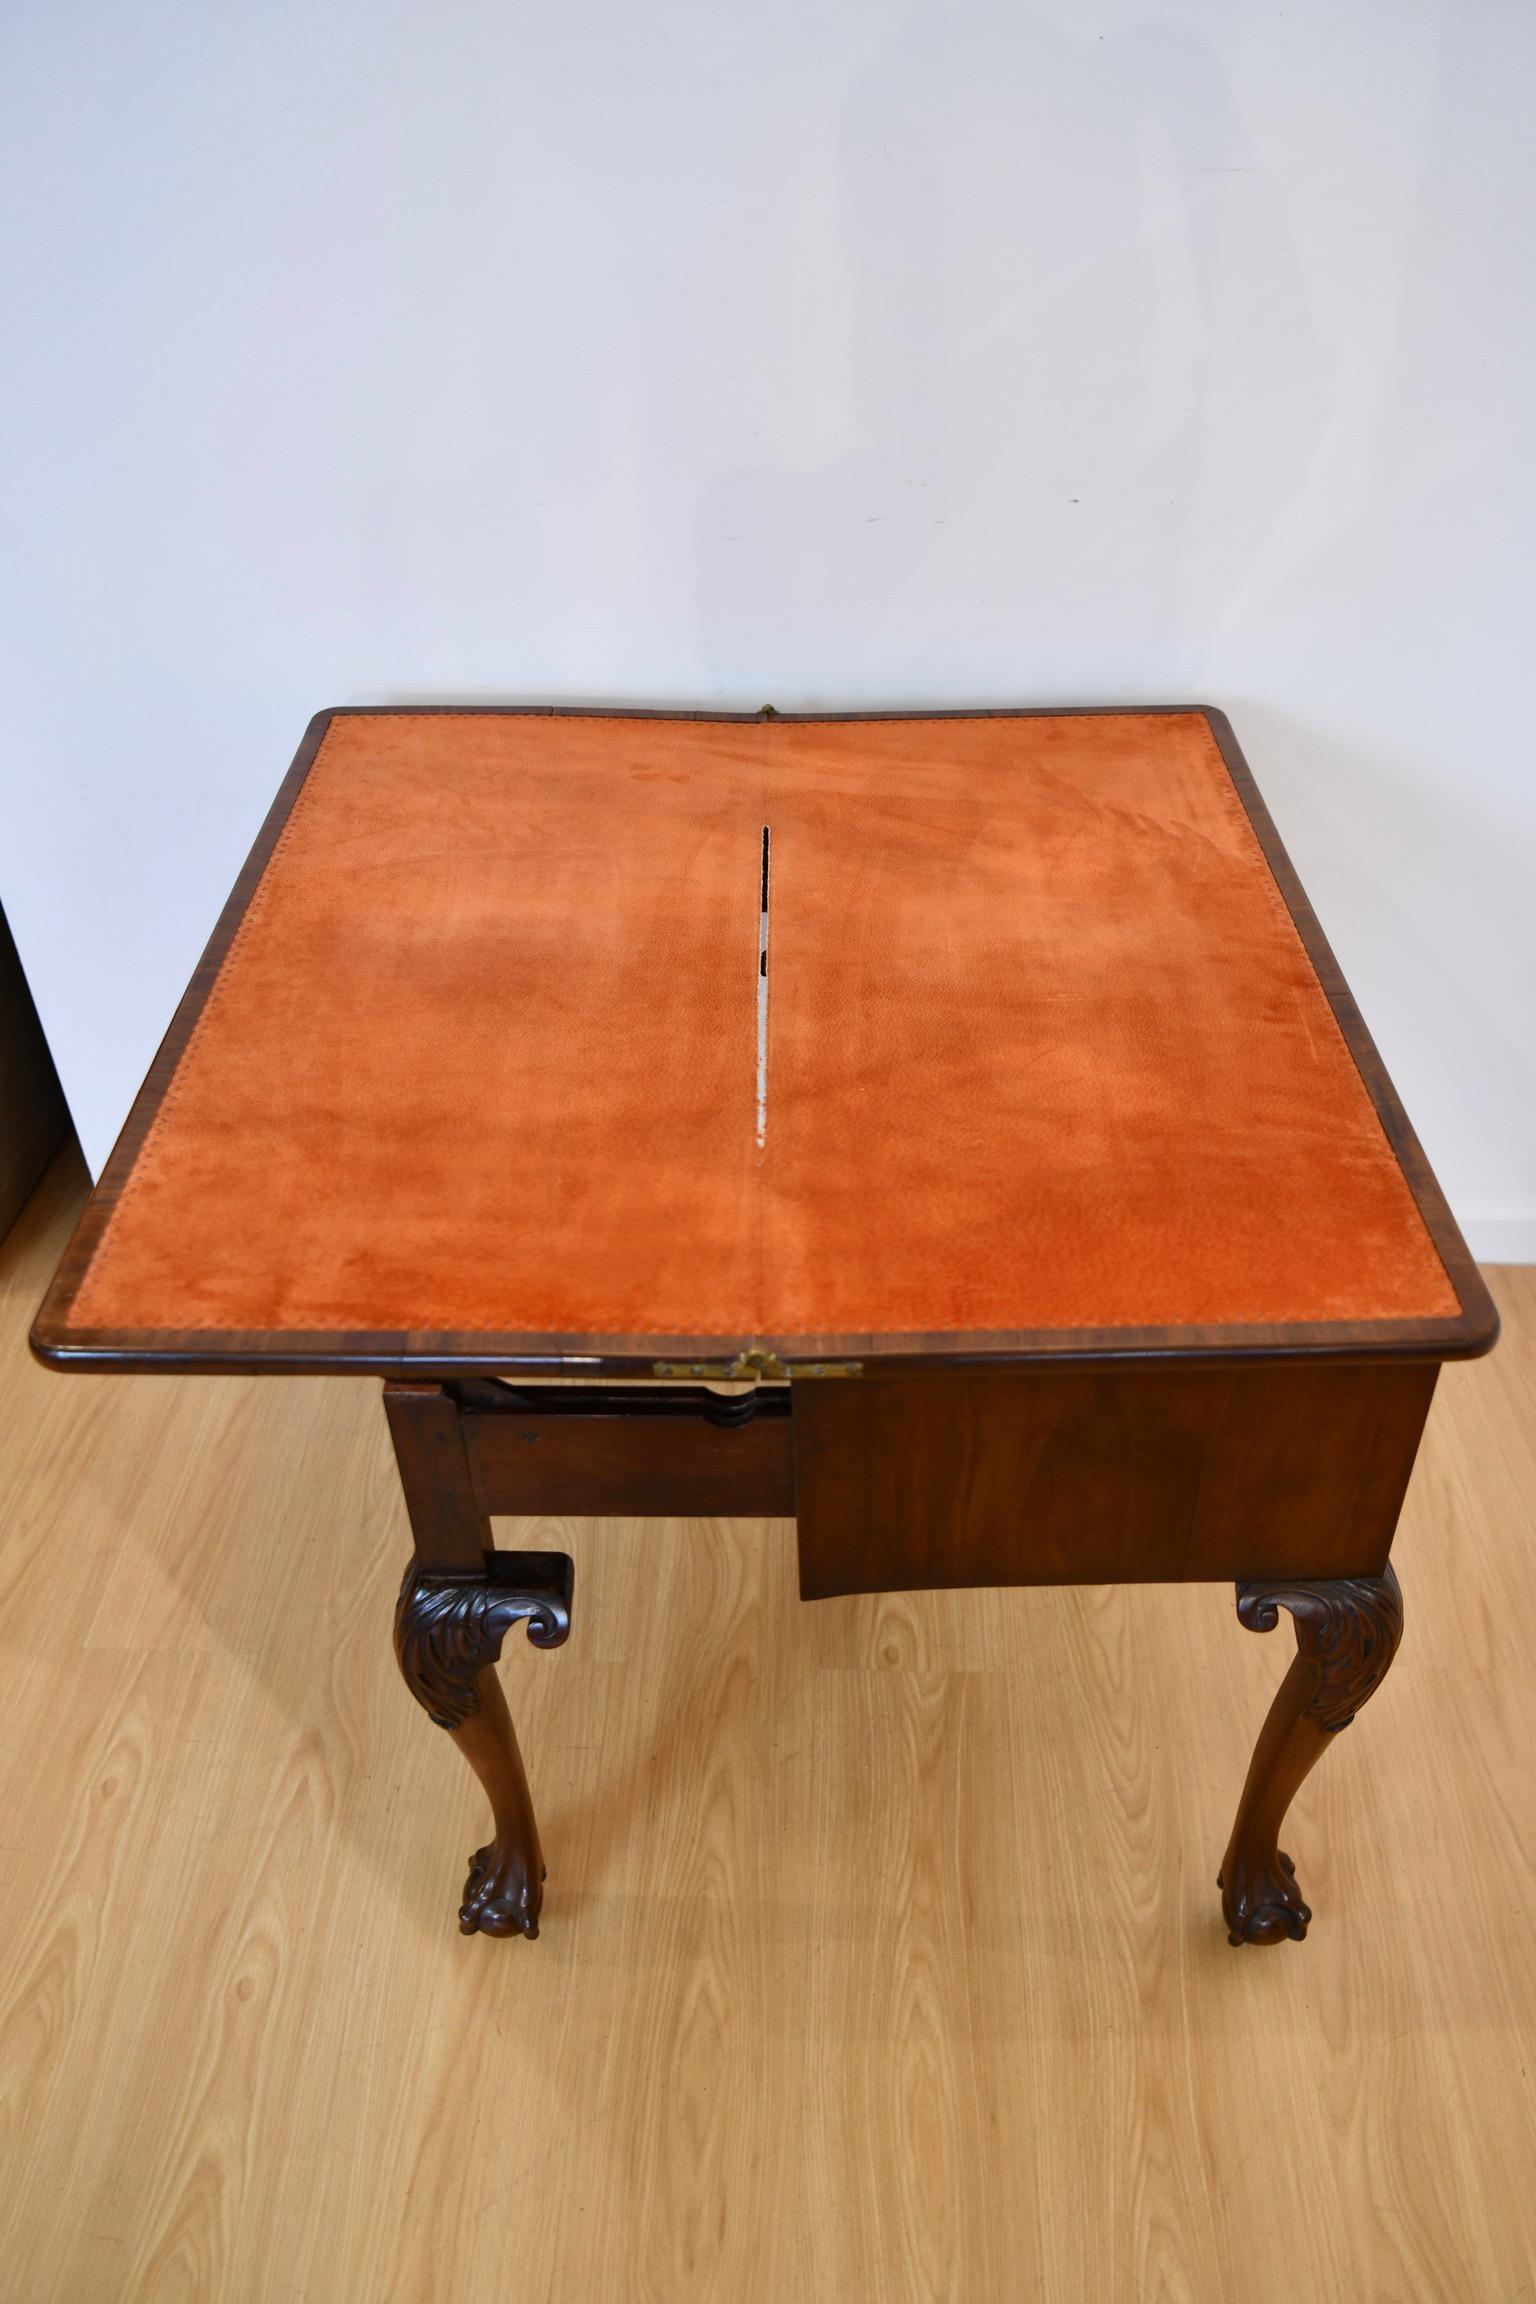 Georgian Revival Transforming Desk and Games Table For Sale 6